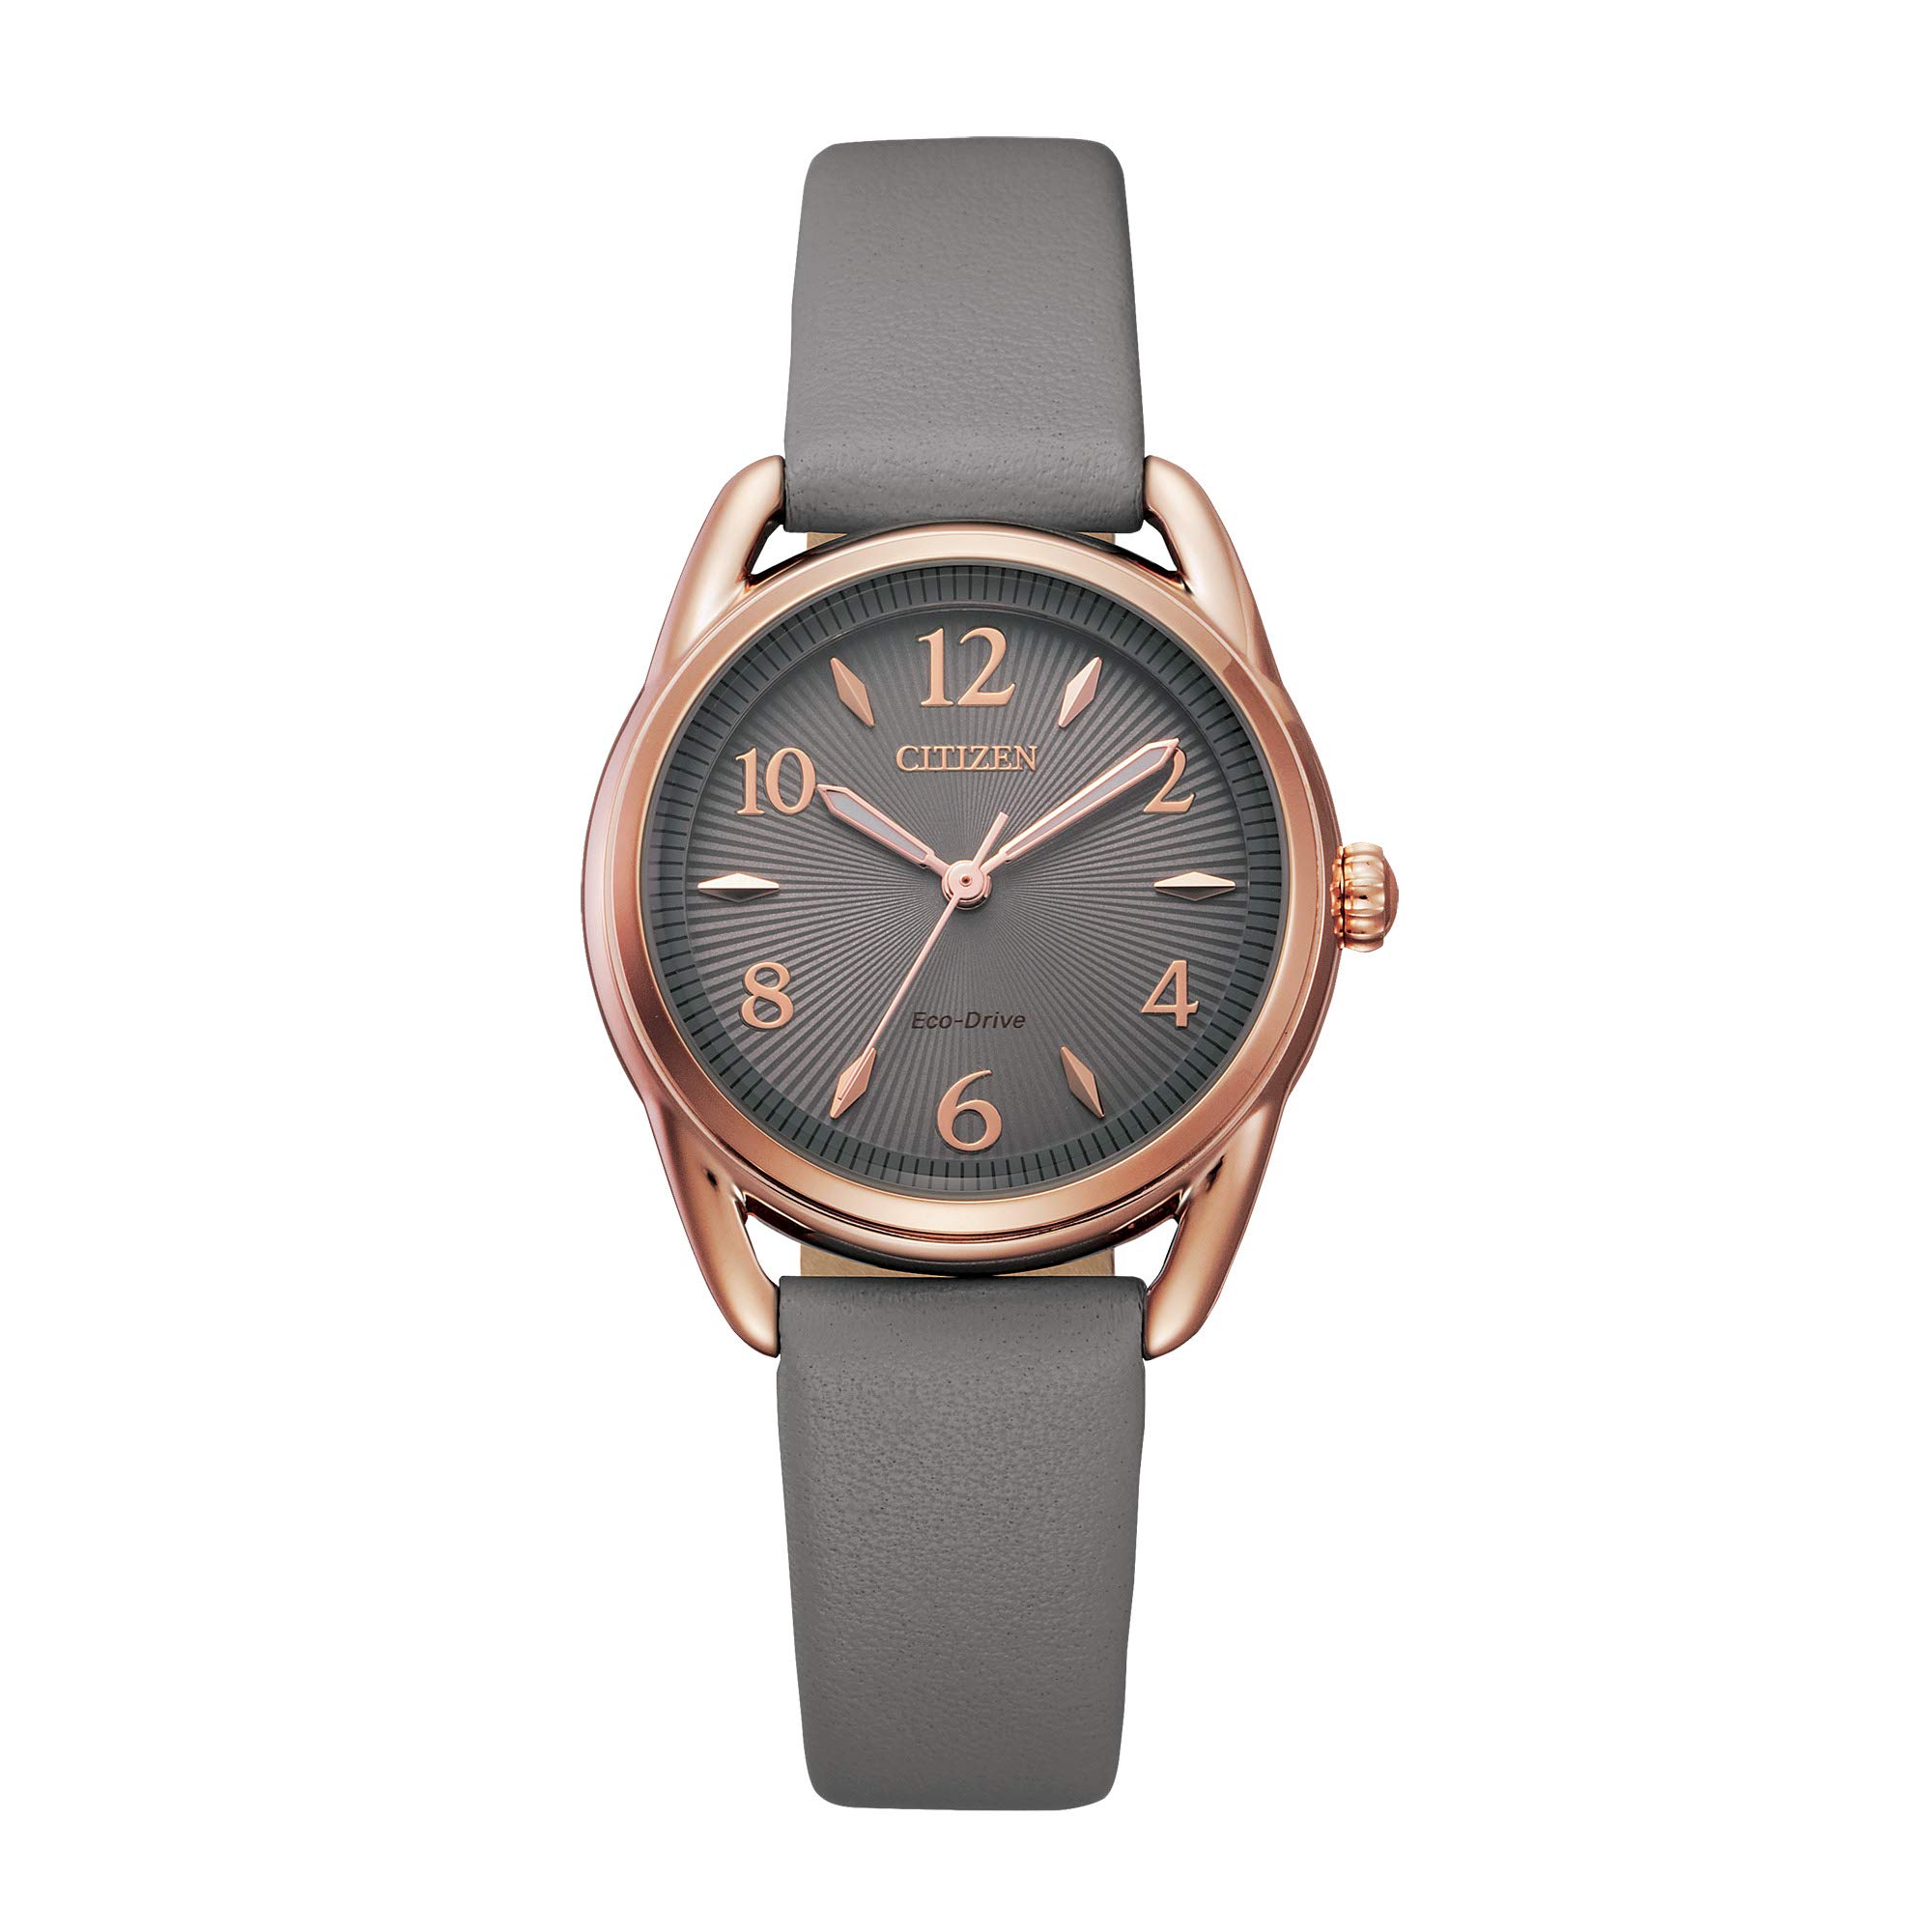 Citizen Women's Eco-Drive Dress Classic Watch in Rose-tone Stainless Steel w/ Grey Leather Strap & Grey Dial $125 + Free Shipping